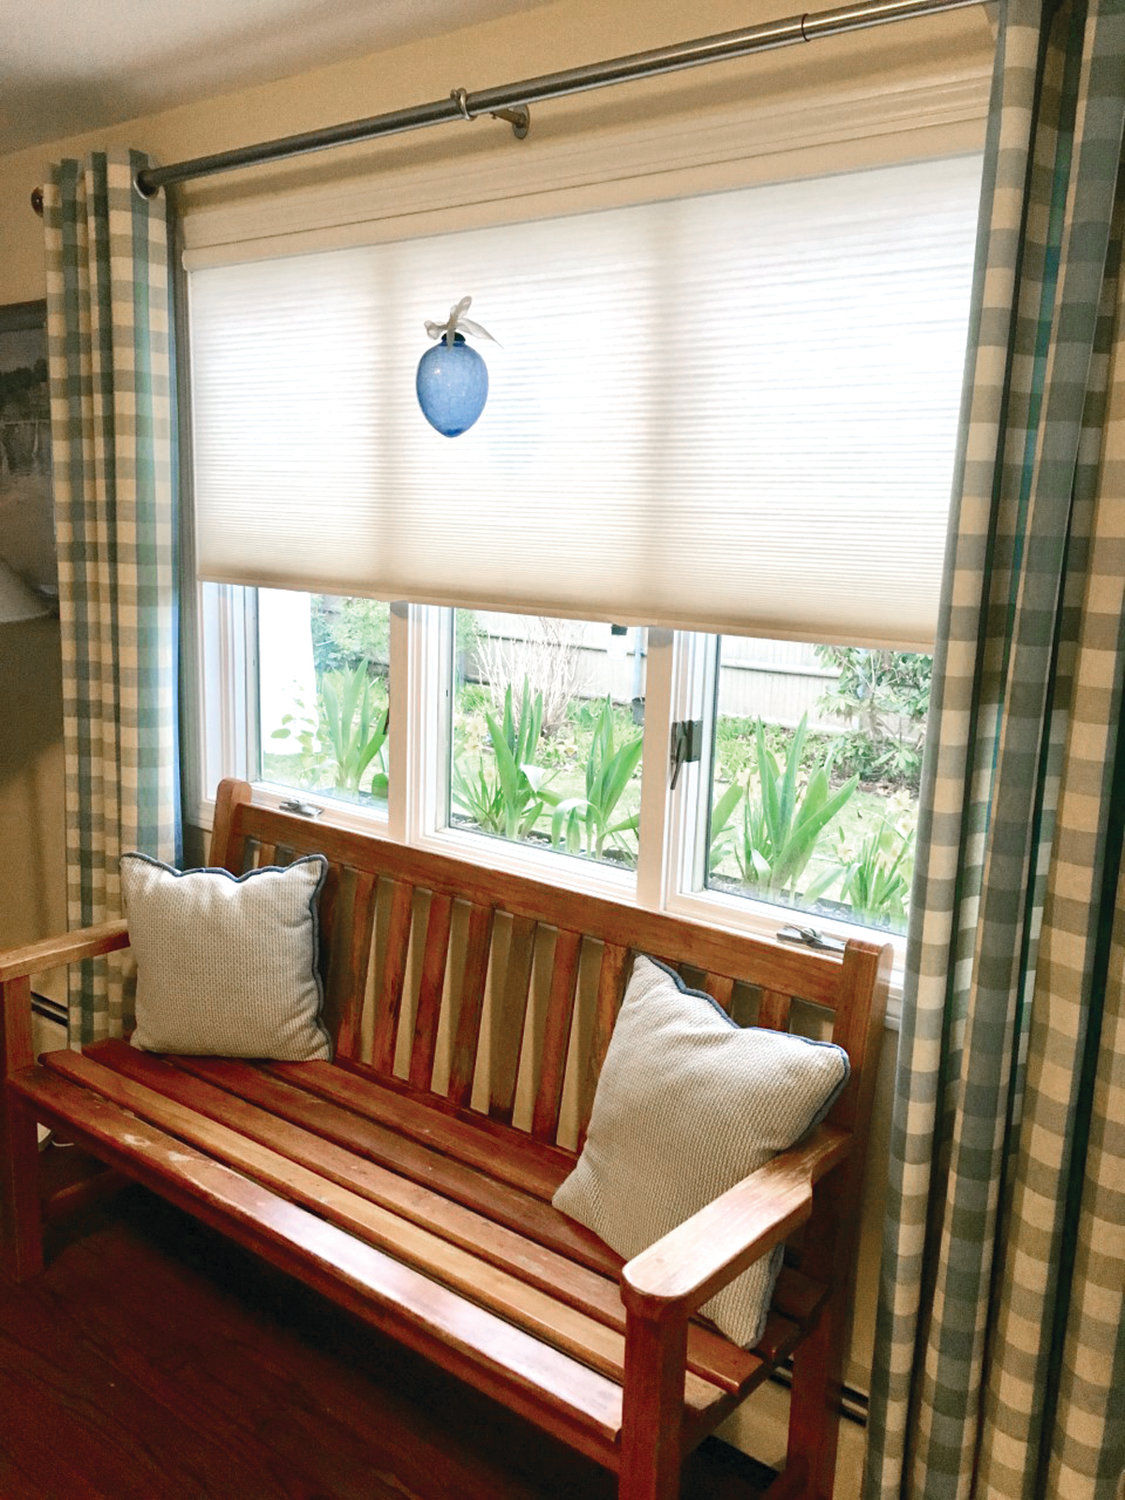 These decorative and functional shades were custom-fit for the windows in the home of a Warwick resident who is both a loyal and longtime customer of Harris Shutters & Blinds.